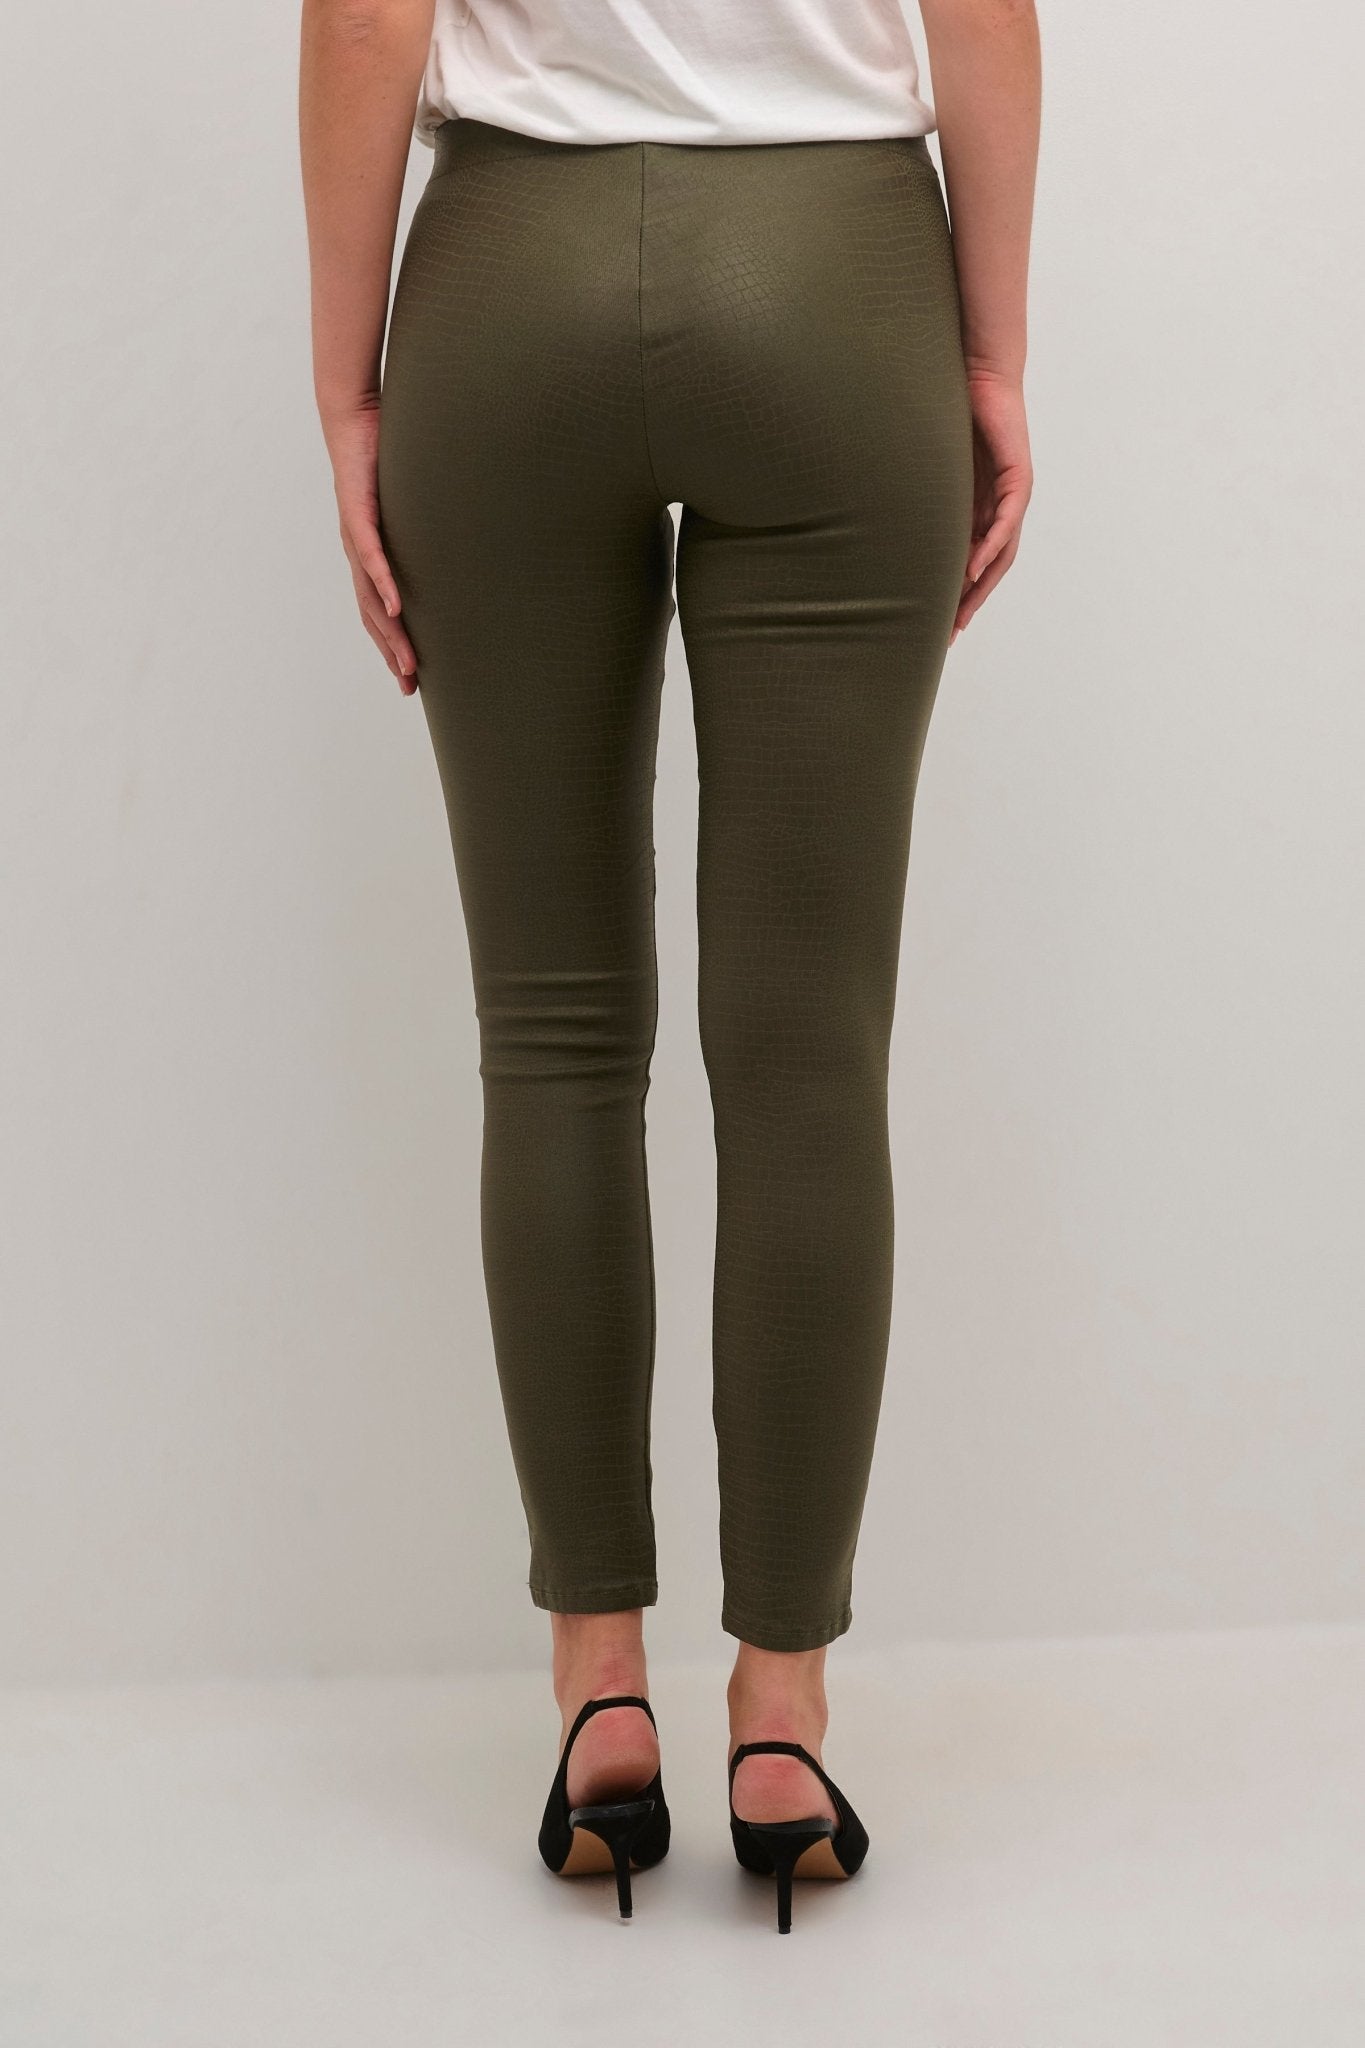 Bettine faux leather leggings by Culture - burnt olive - Blue Sky Fashions & Lingerie